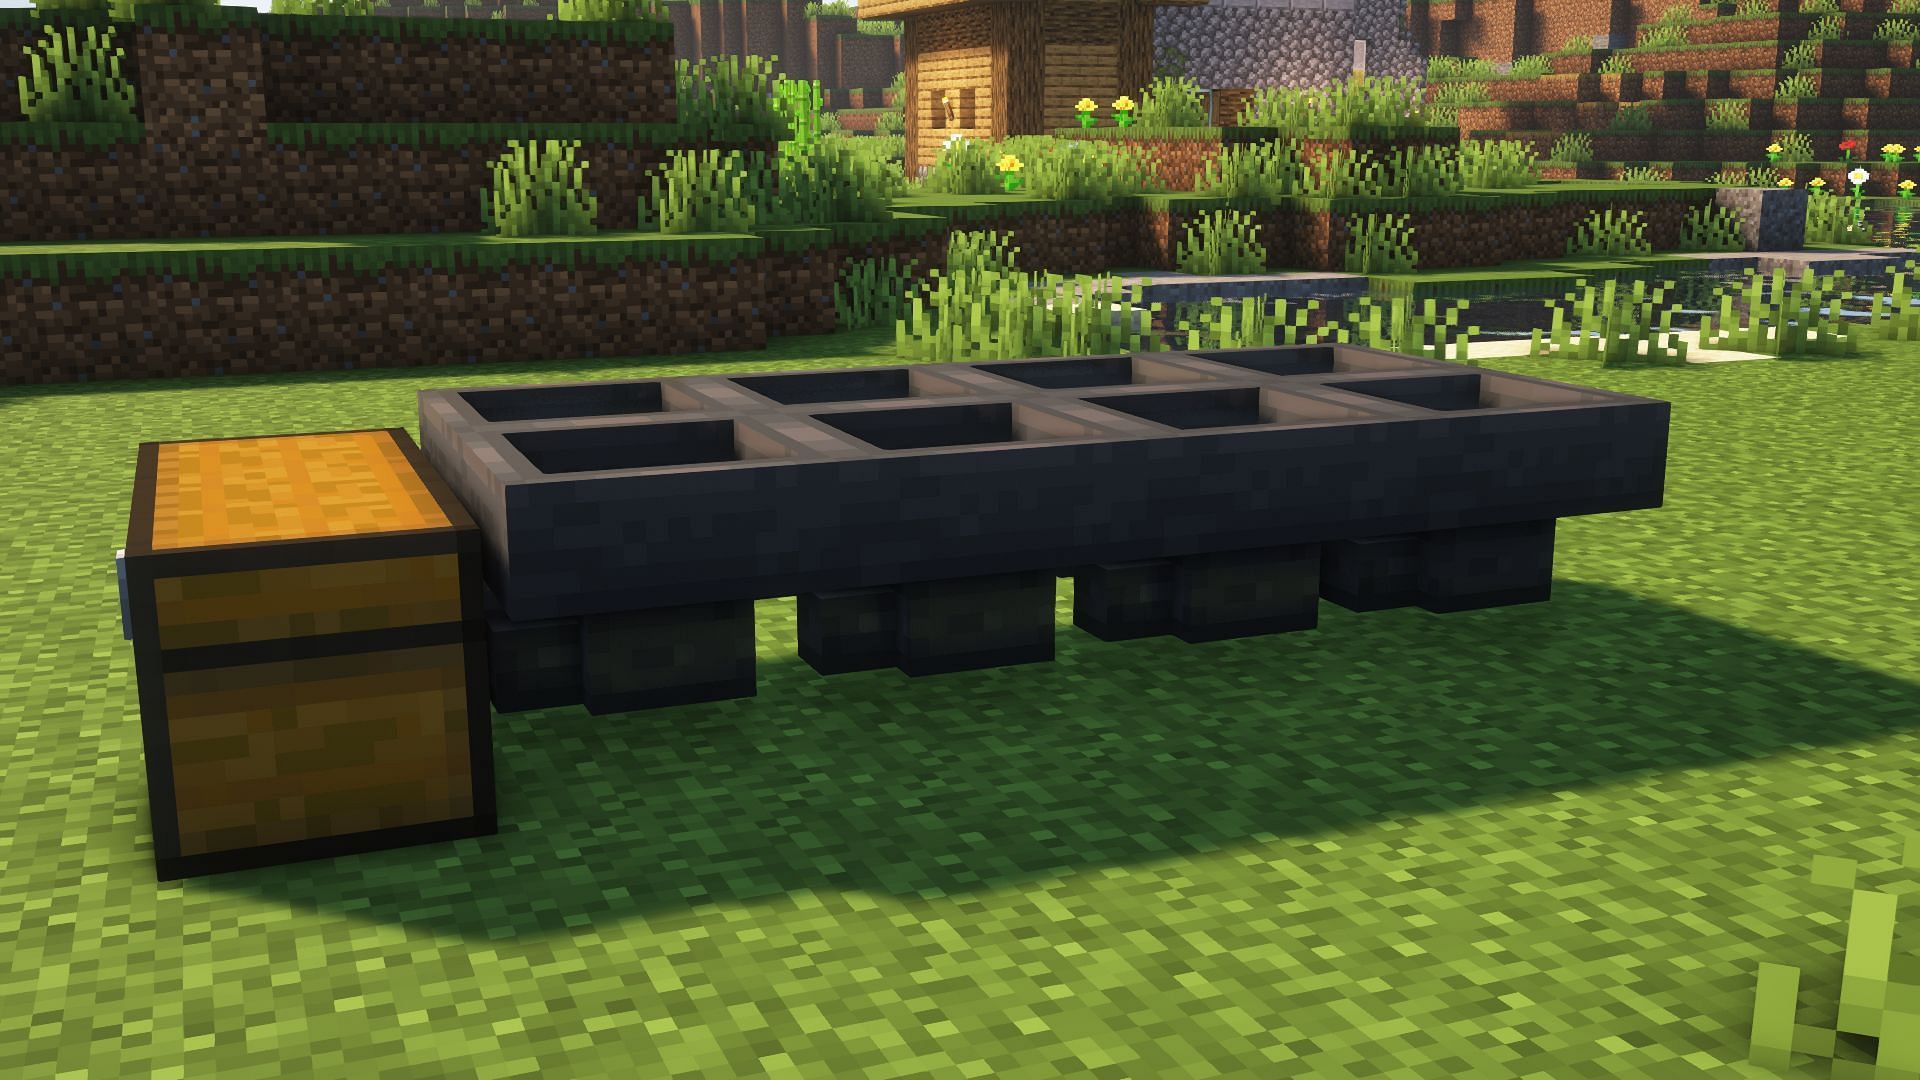 A double chest with hoppers going into it (Image via Mojang)